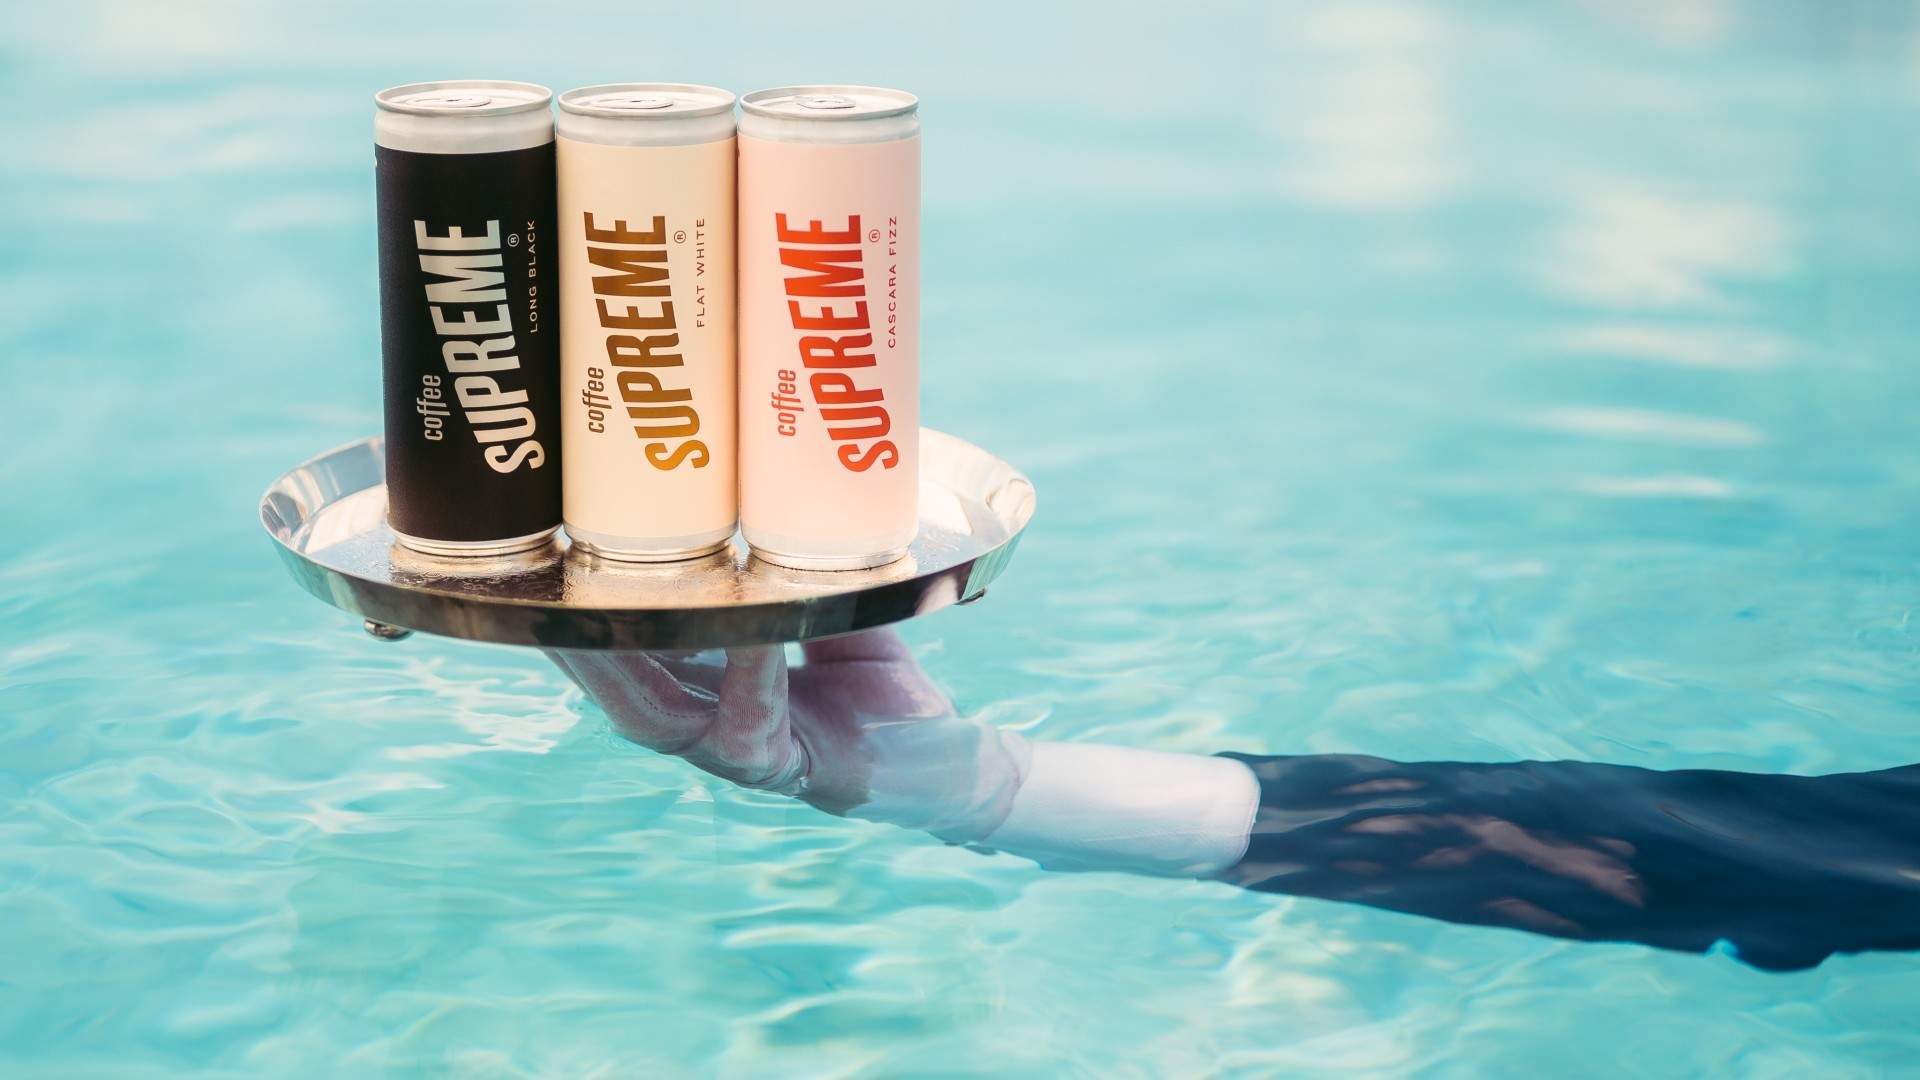 Coffee Supreme Has Released a Range of Canned Iced Coffee So You Can Stay Caffeinated on the Run